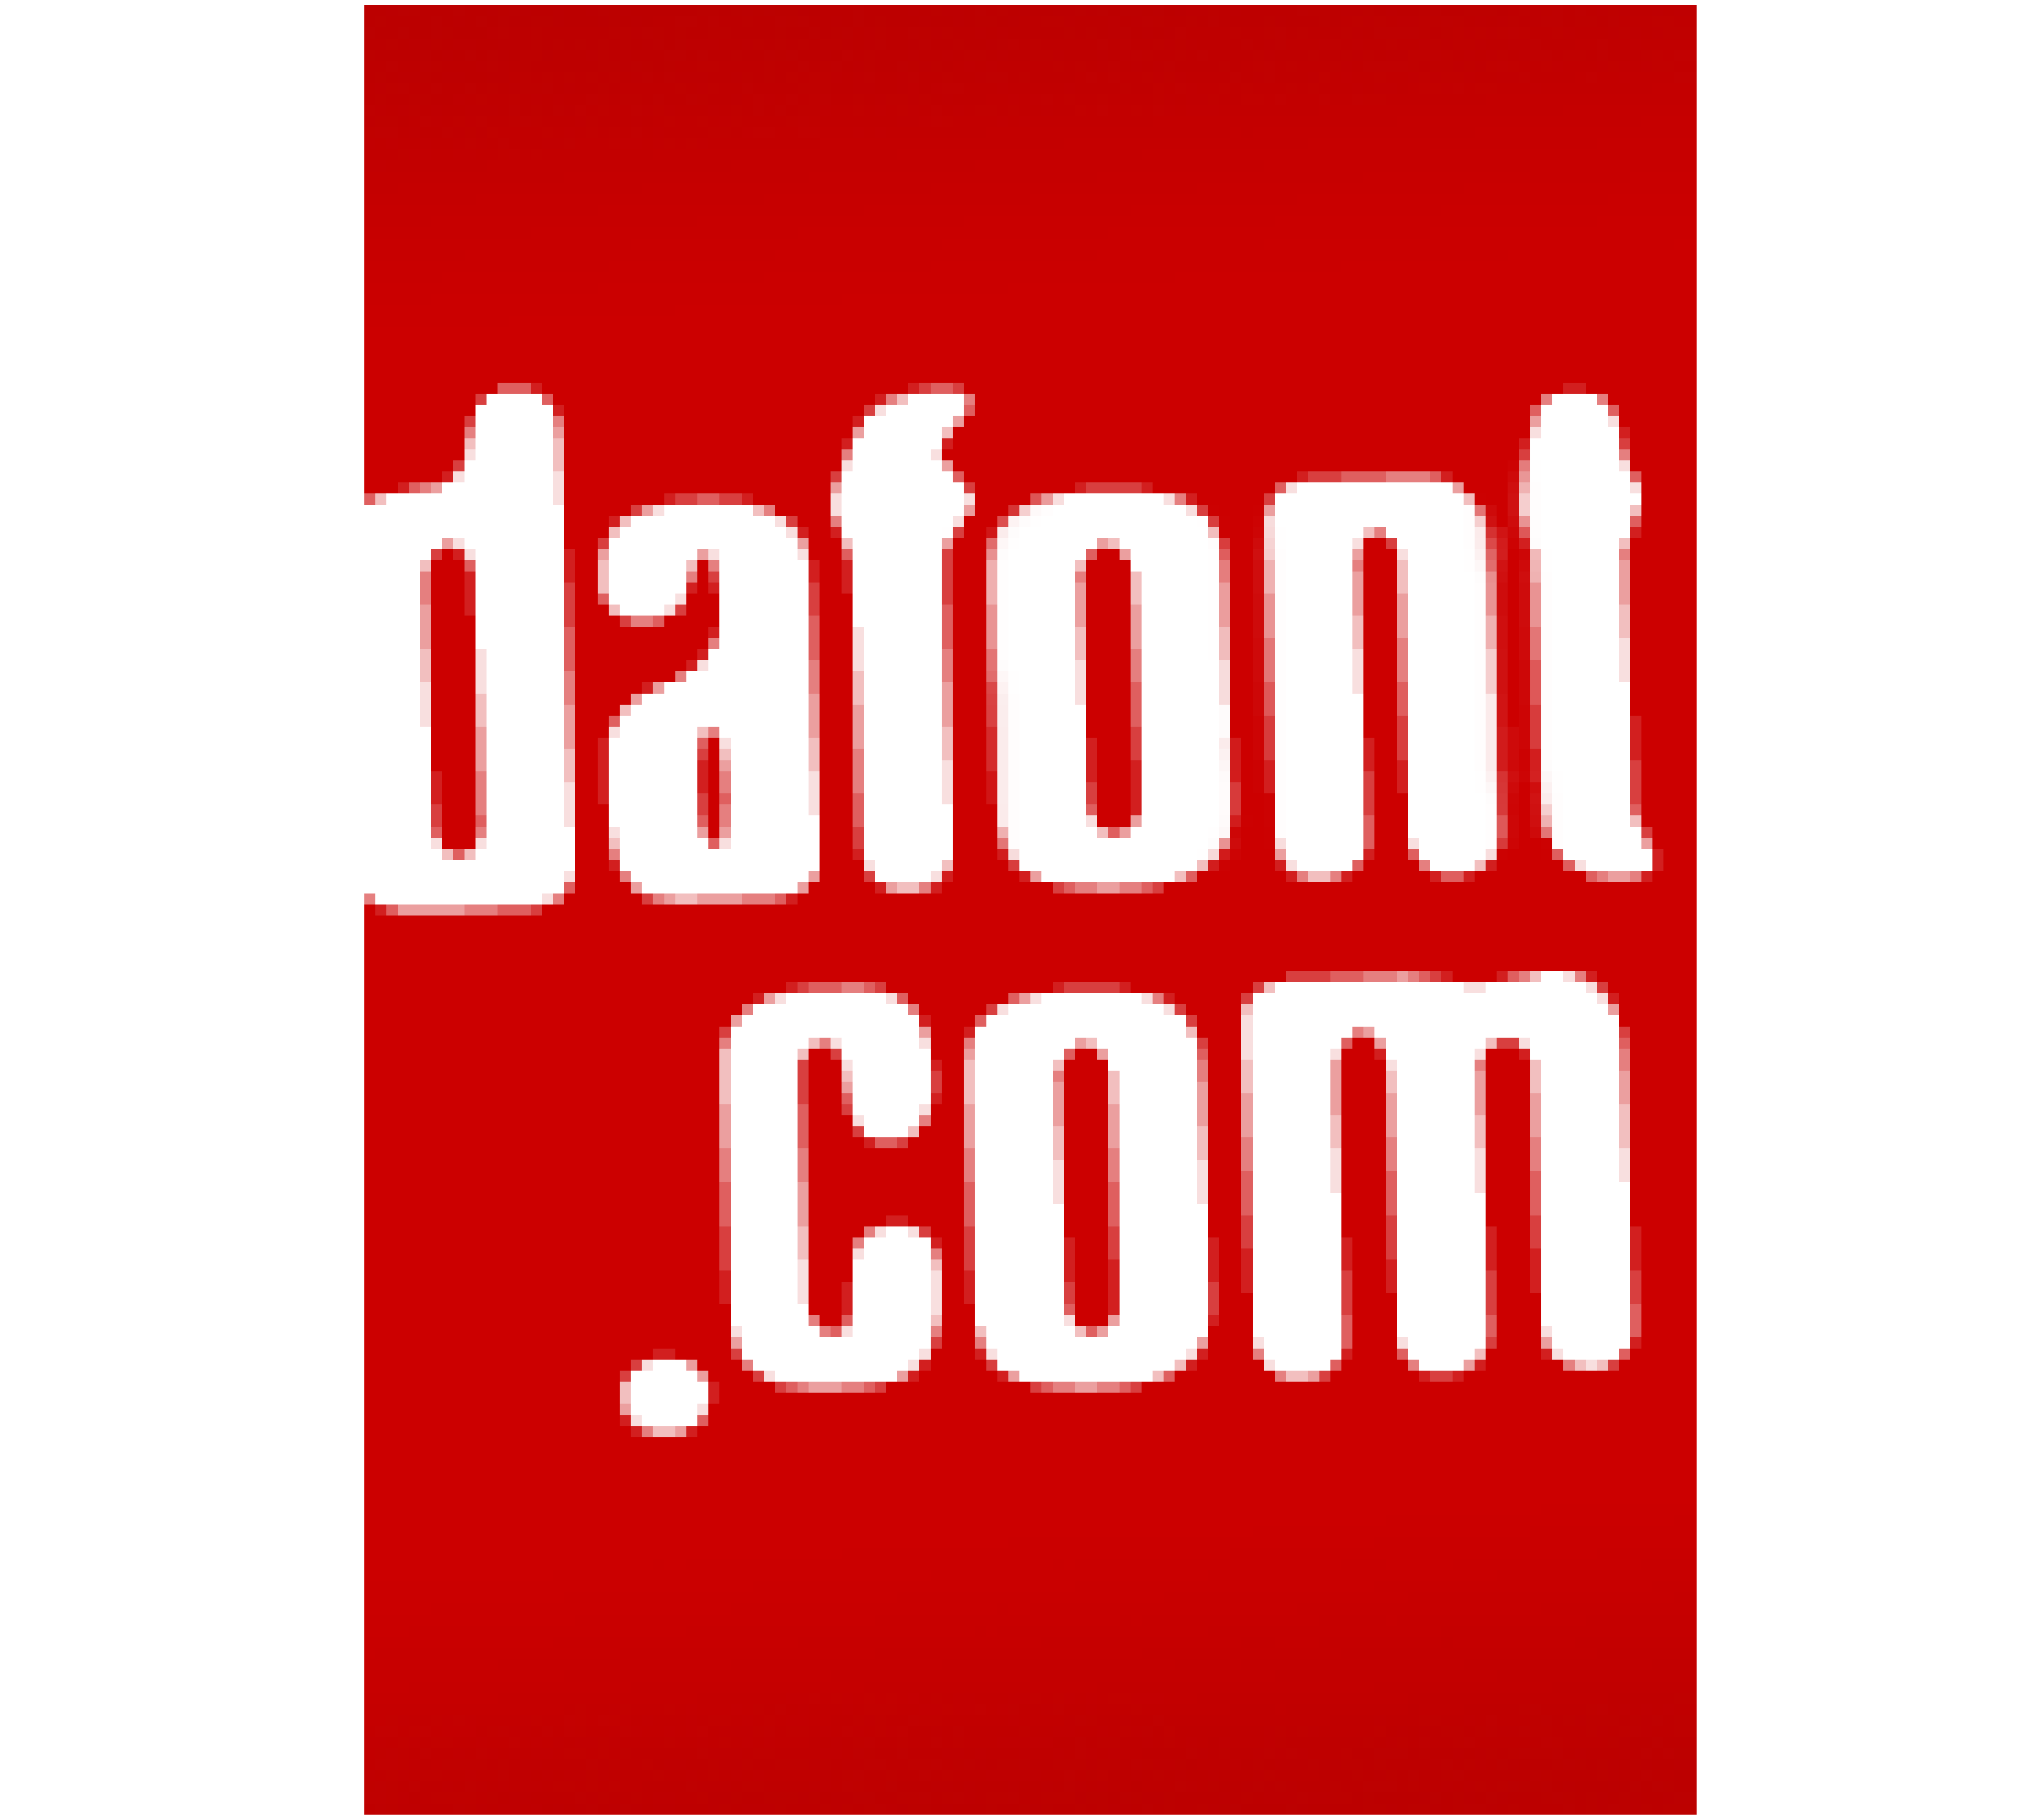 Images/dafont-icon.png